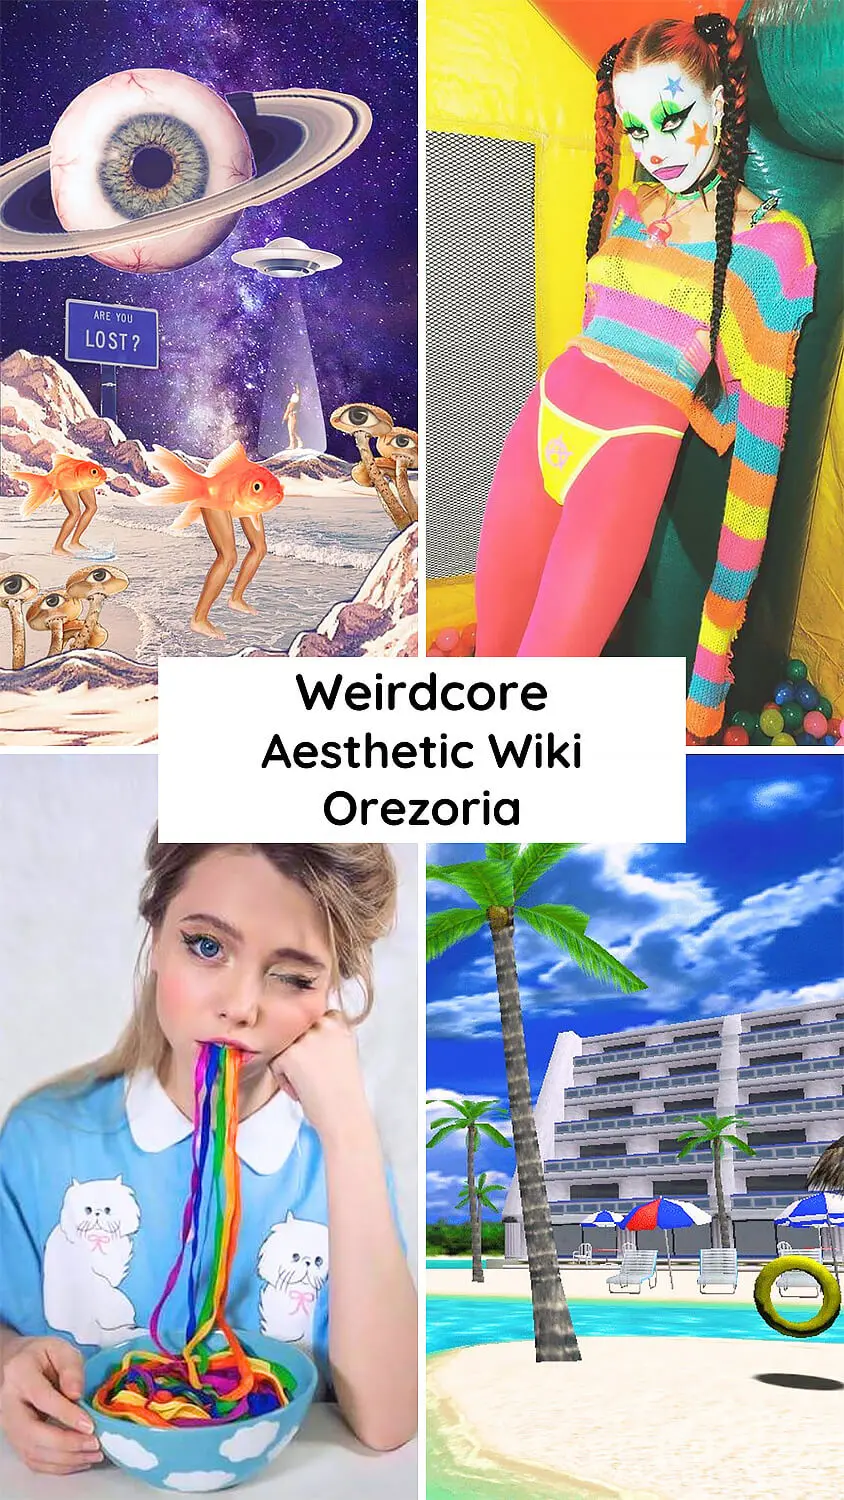 What is the Weirdcore Aesthetic?